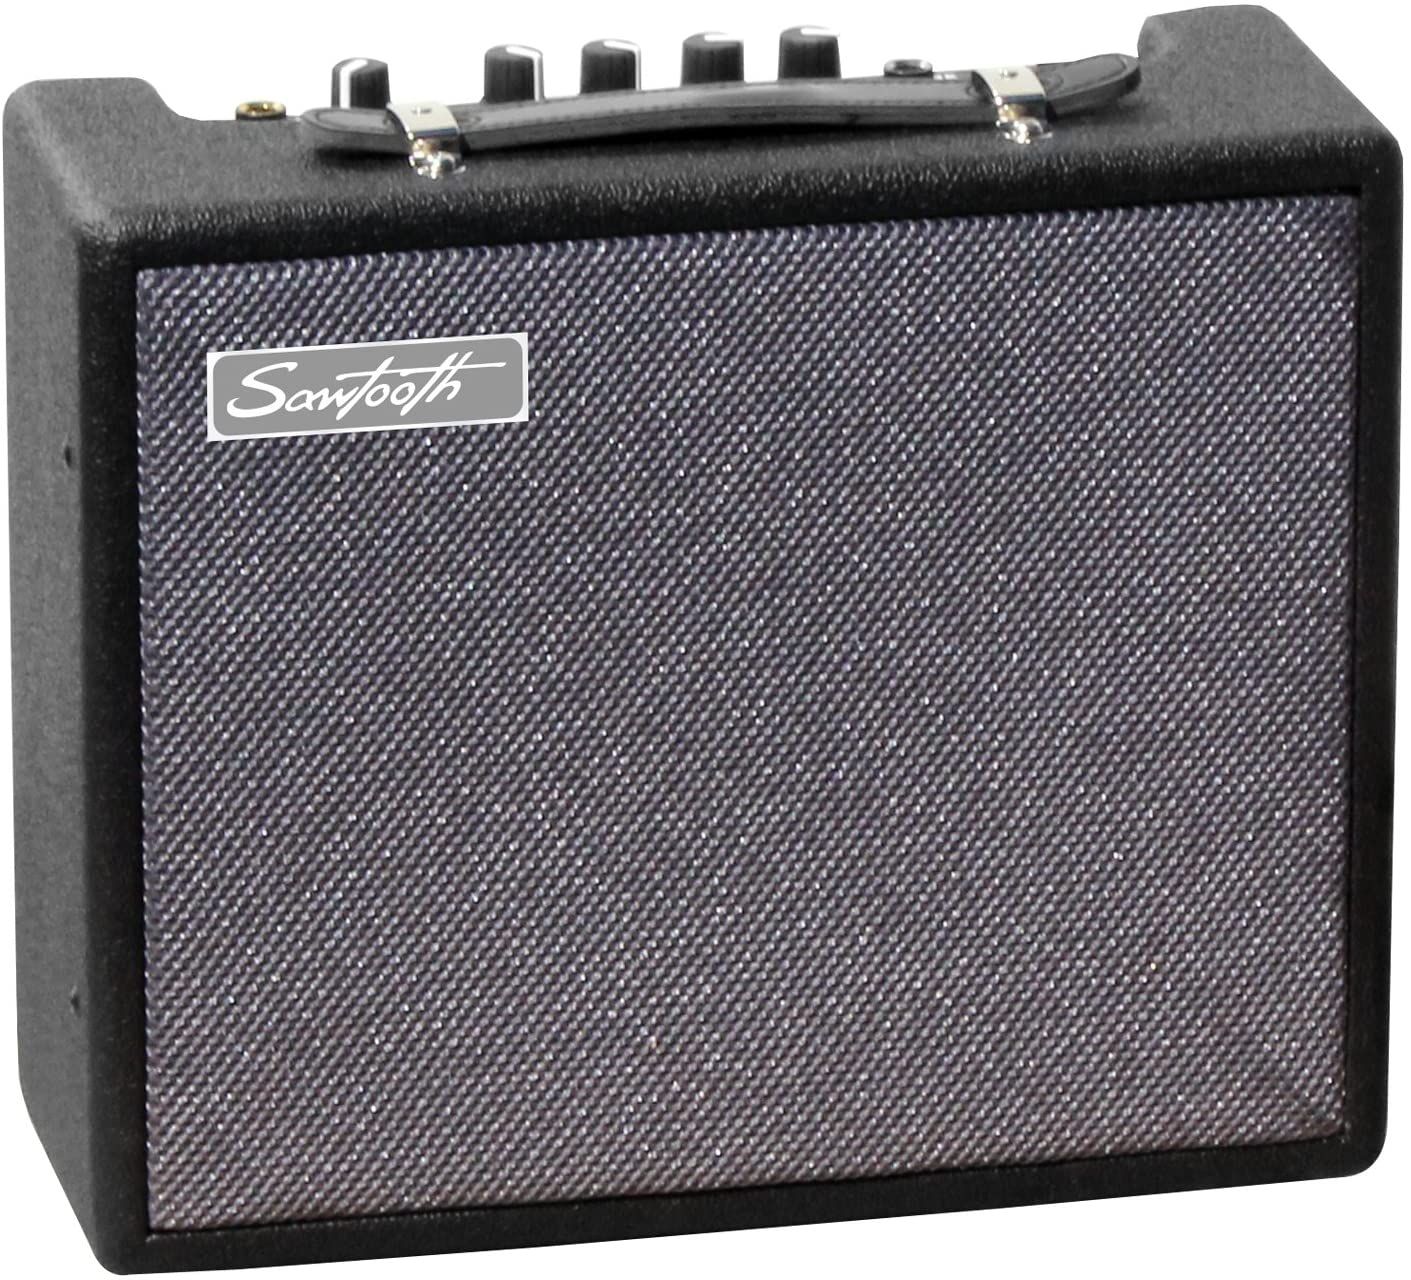 Sawtooth guitar amp for beginners